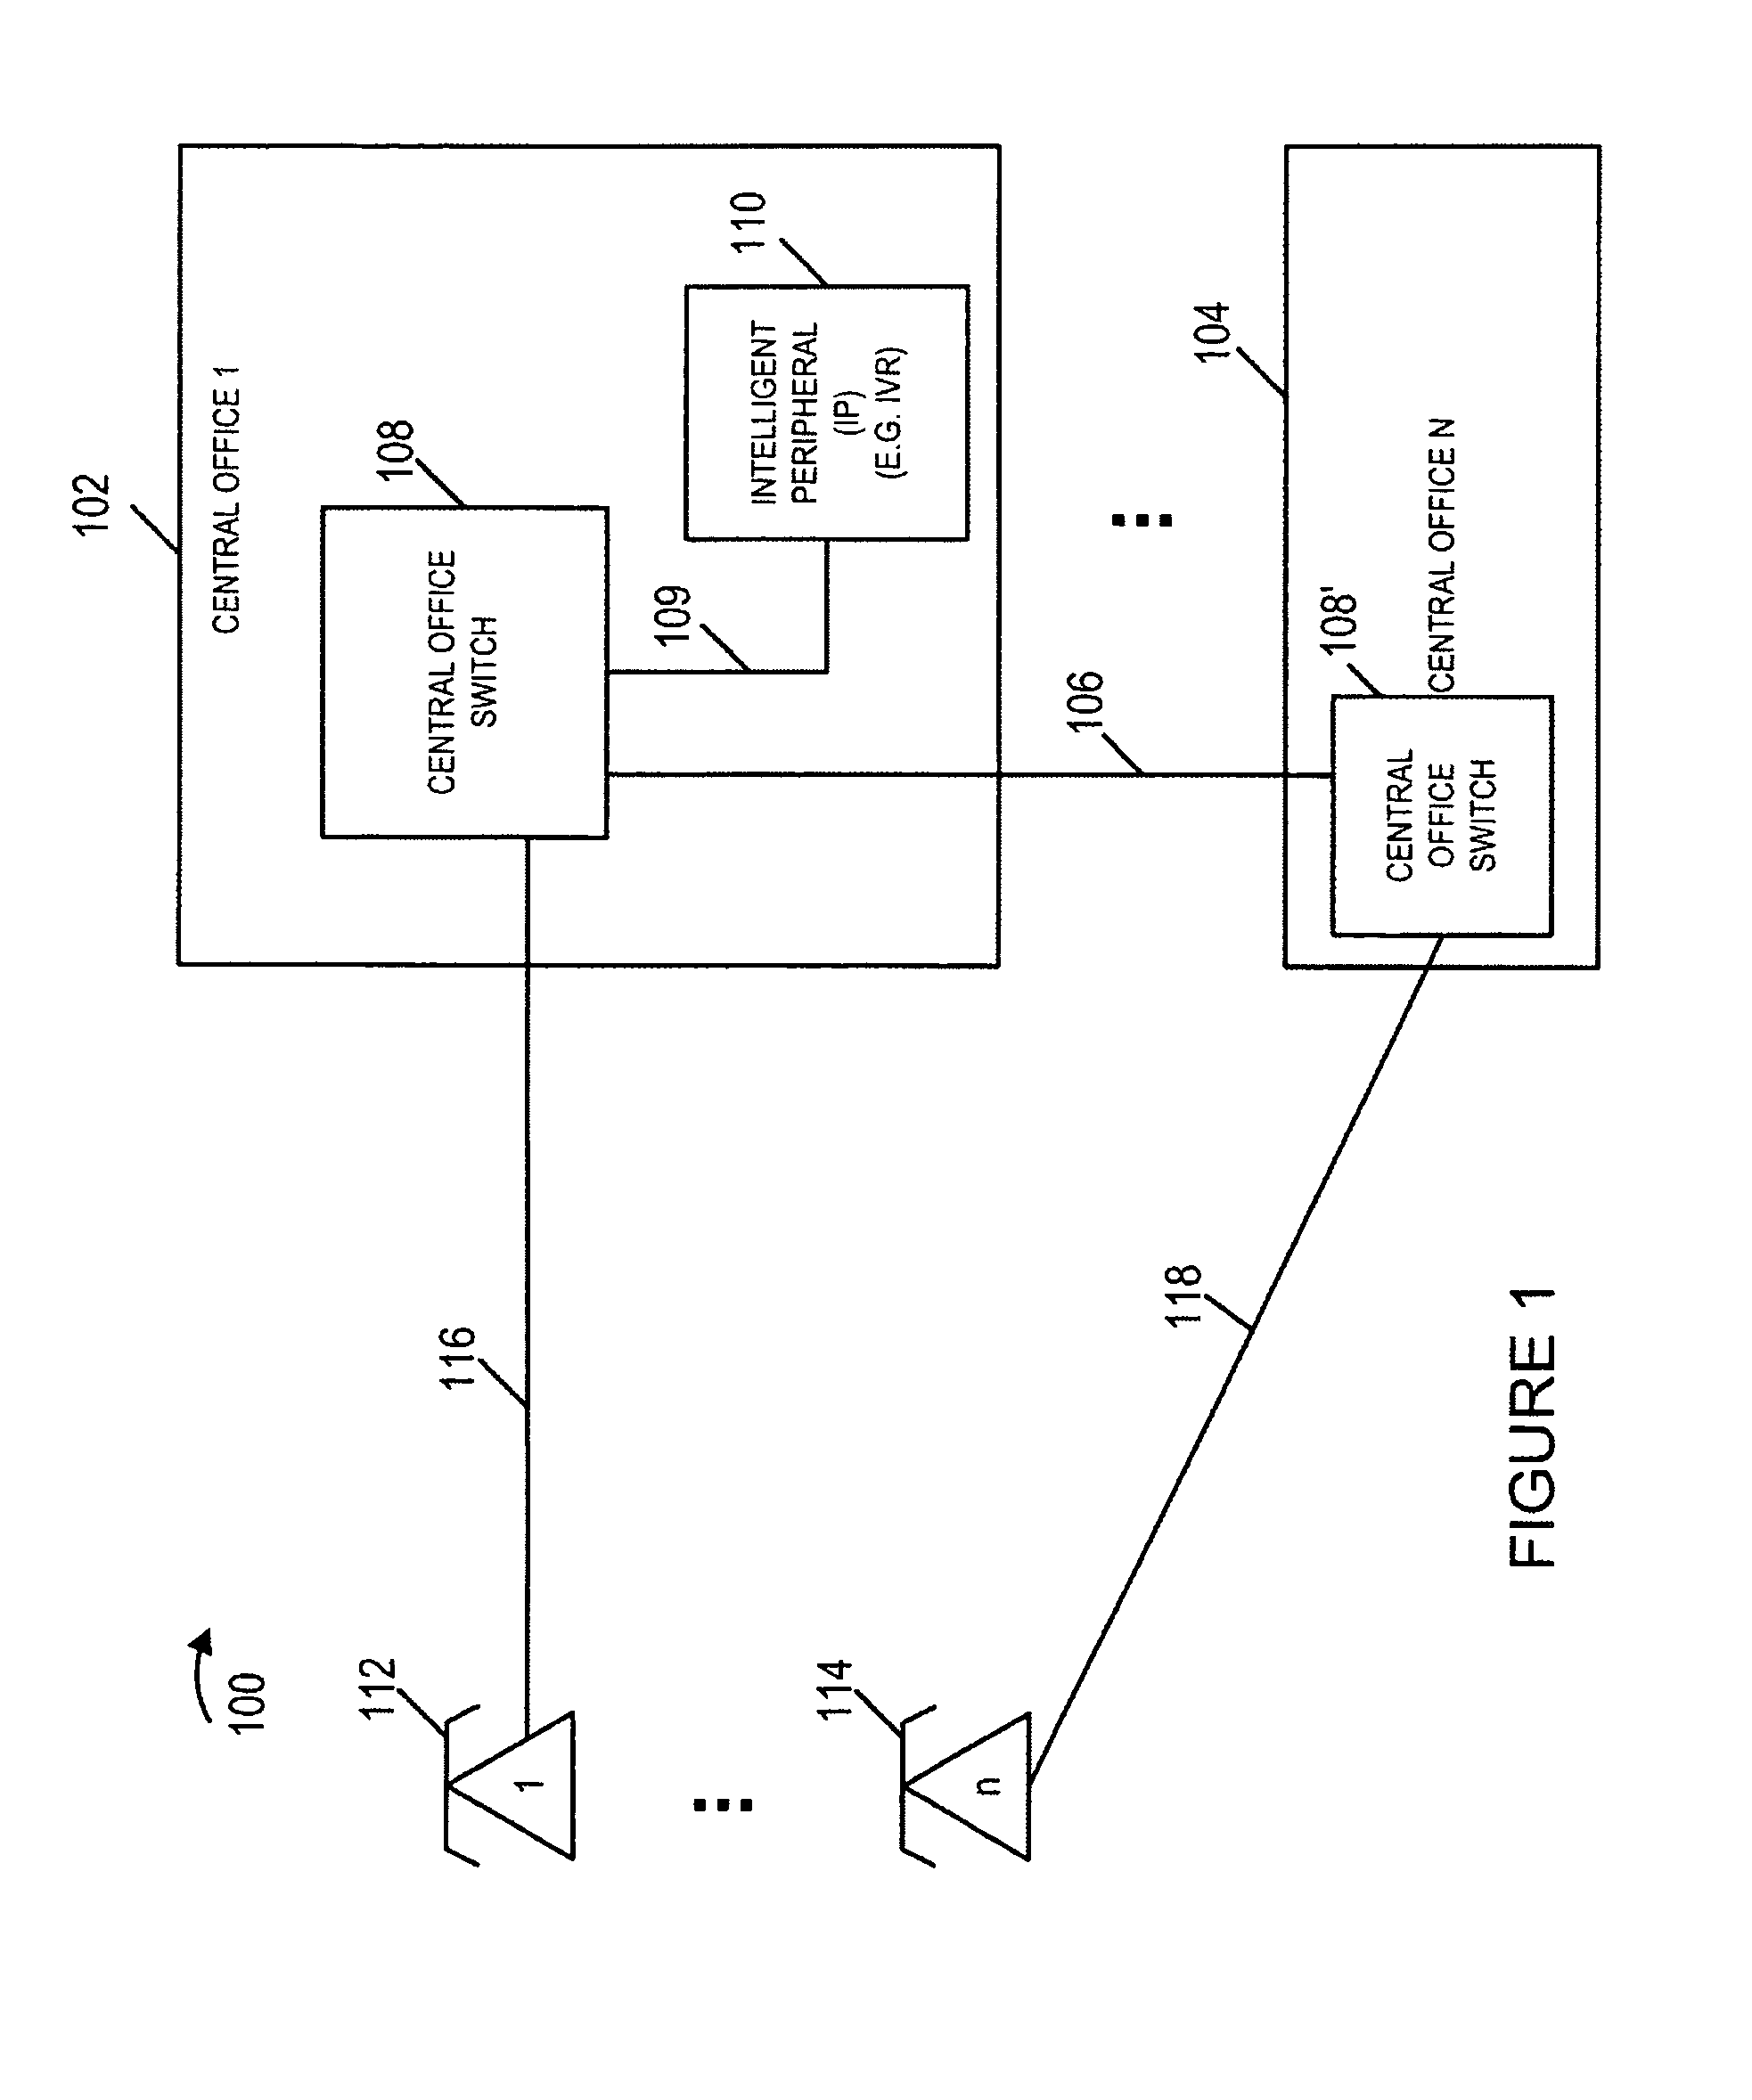 Enhanced interface for use with speech recognition